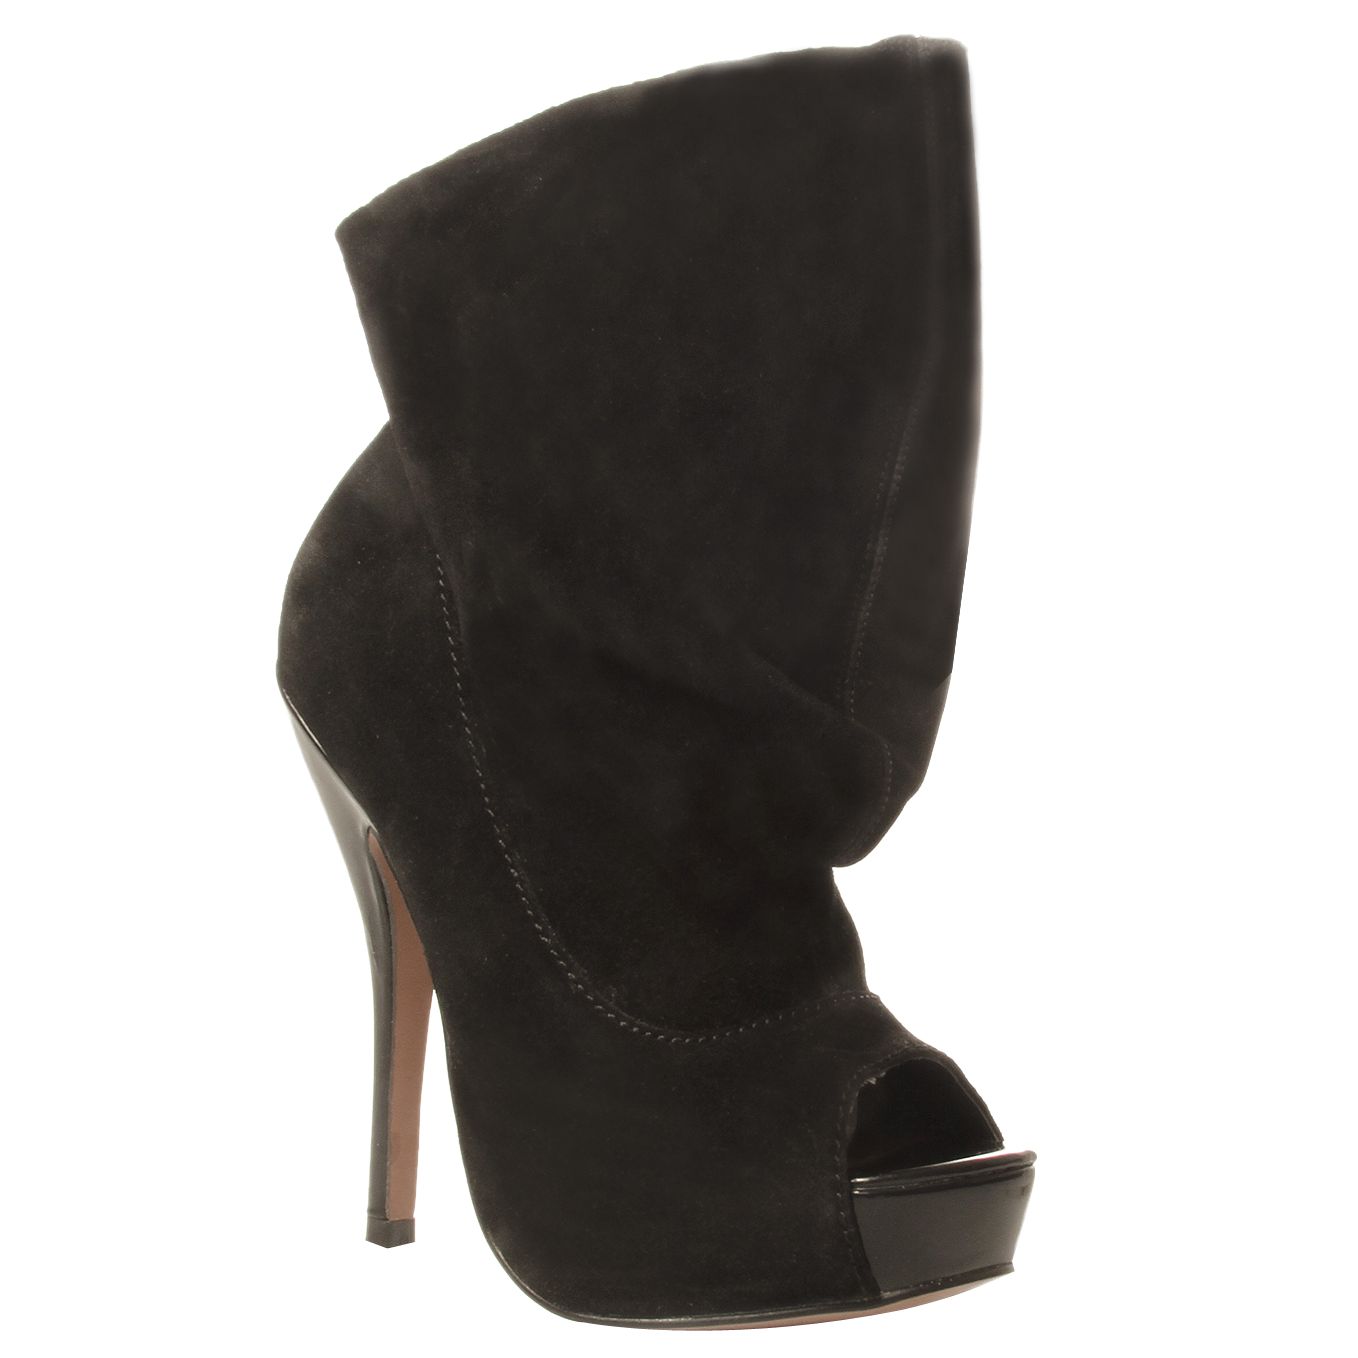 KG by Kurt Geiger Sogo Suede Slouchy Cuff Boots, Black at John Lewis